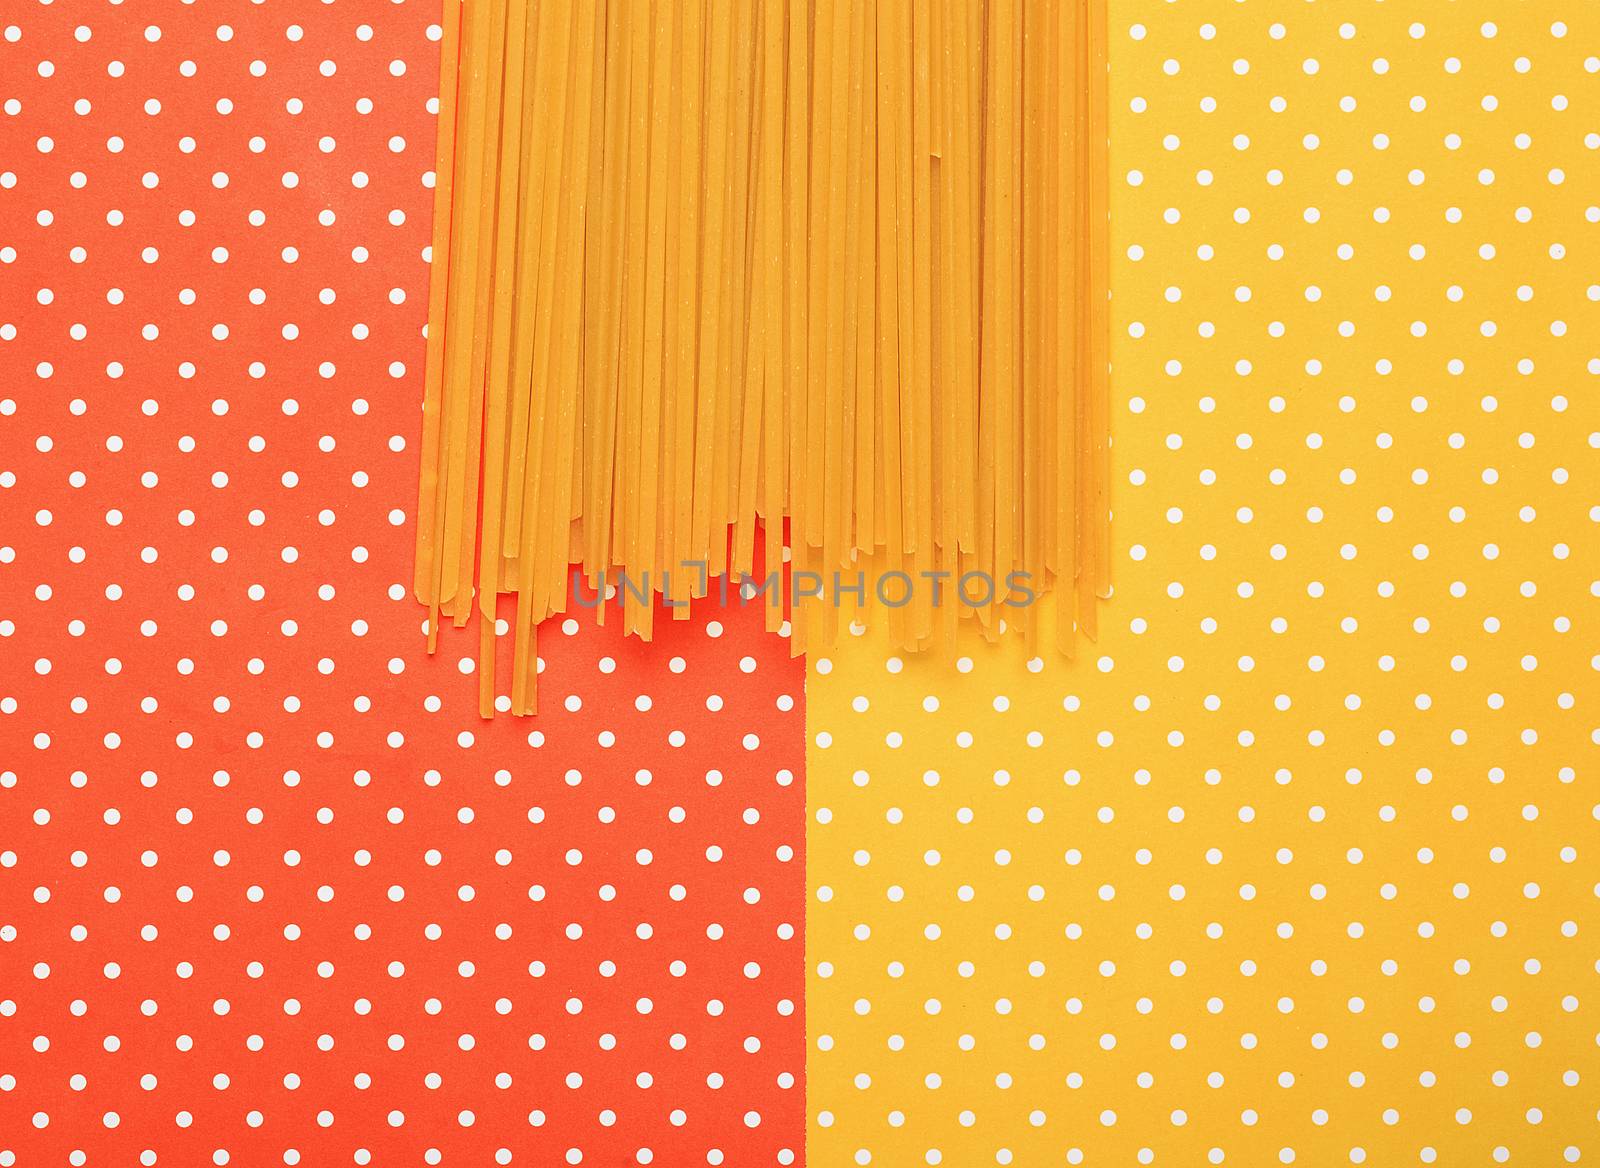 Spaghetti with colorful topped background by nachrc2001